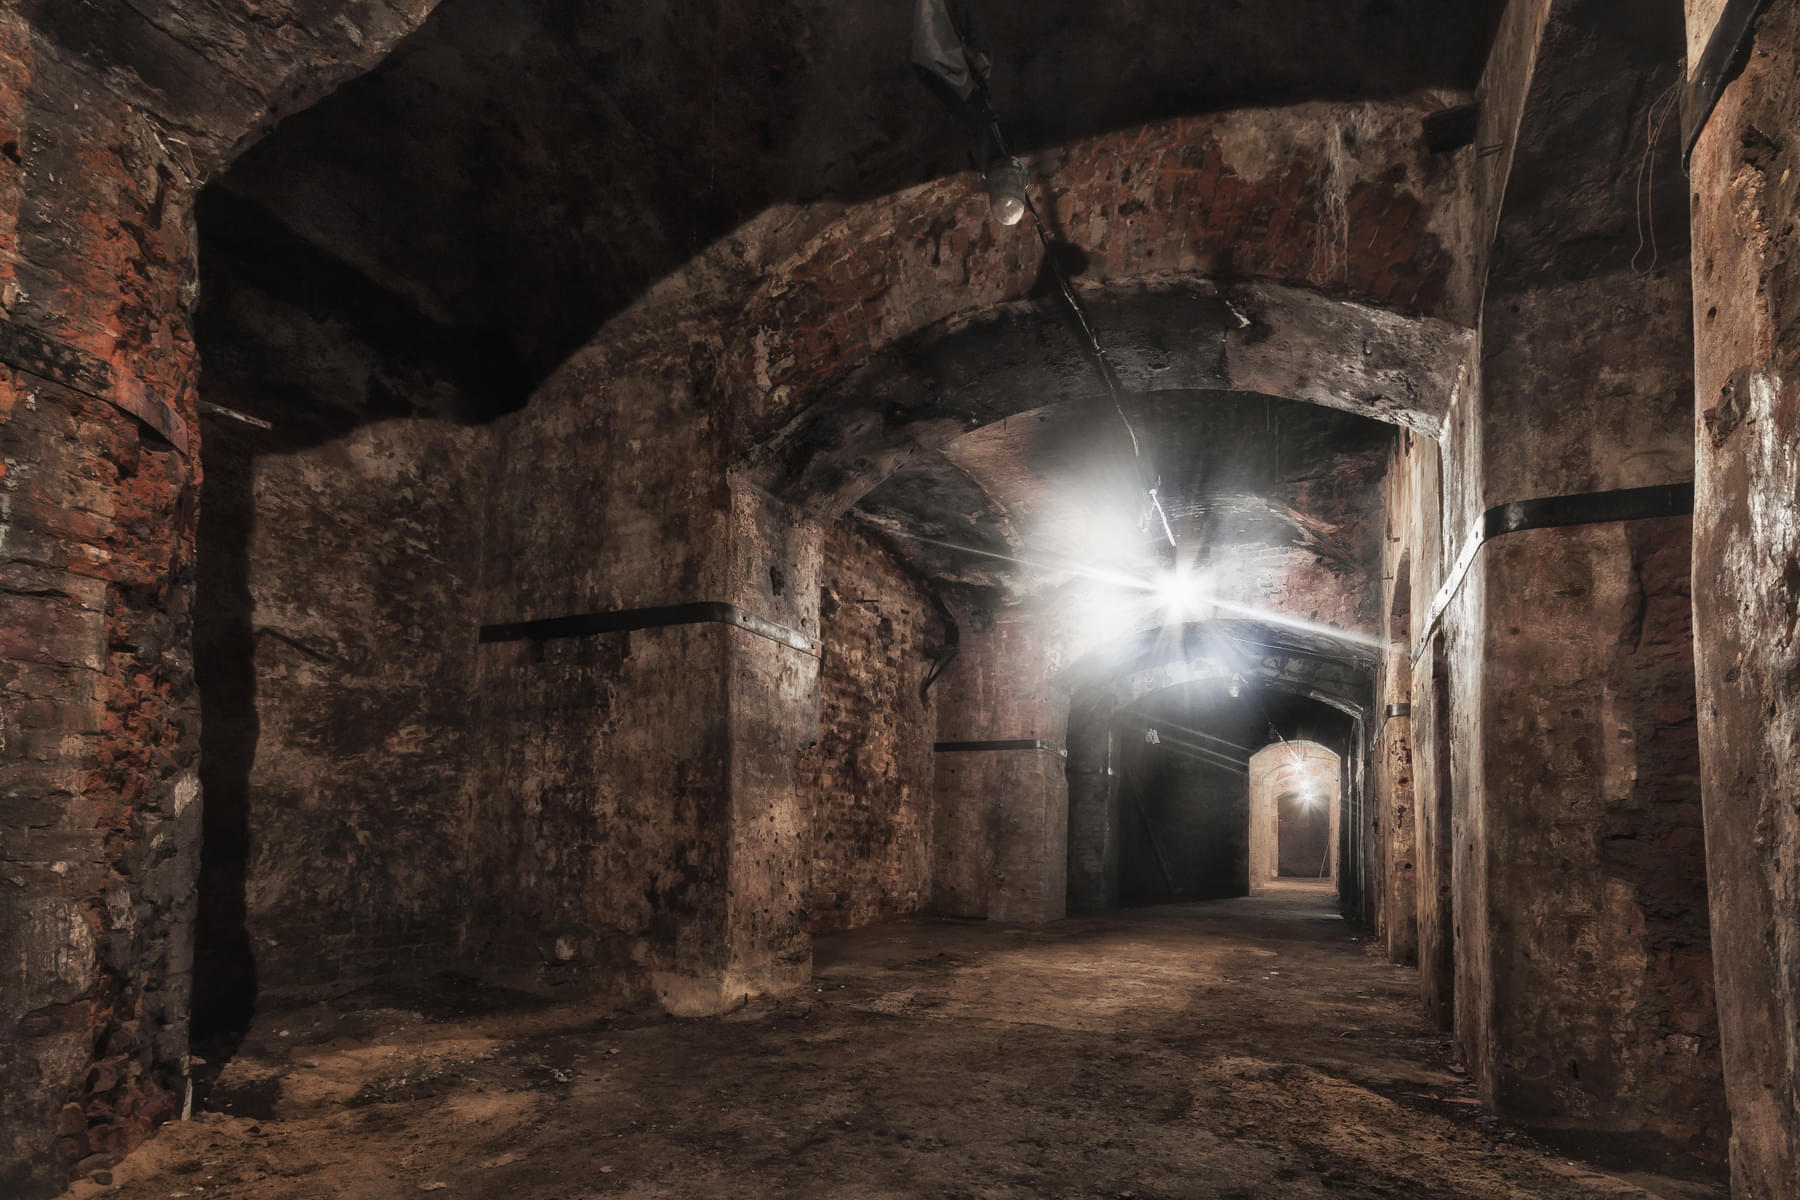 Explore the spooky alleys of the dungeon